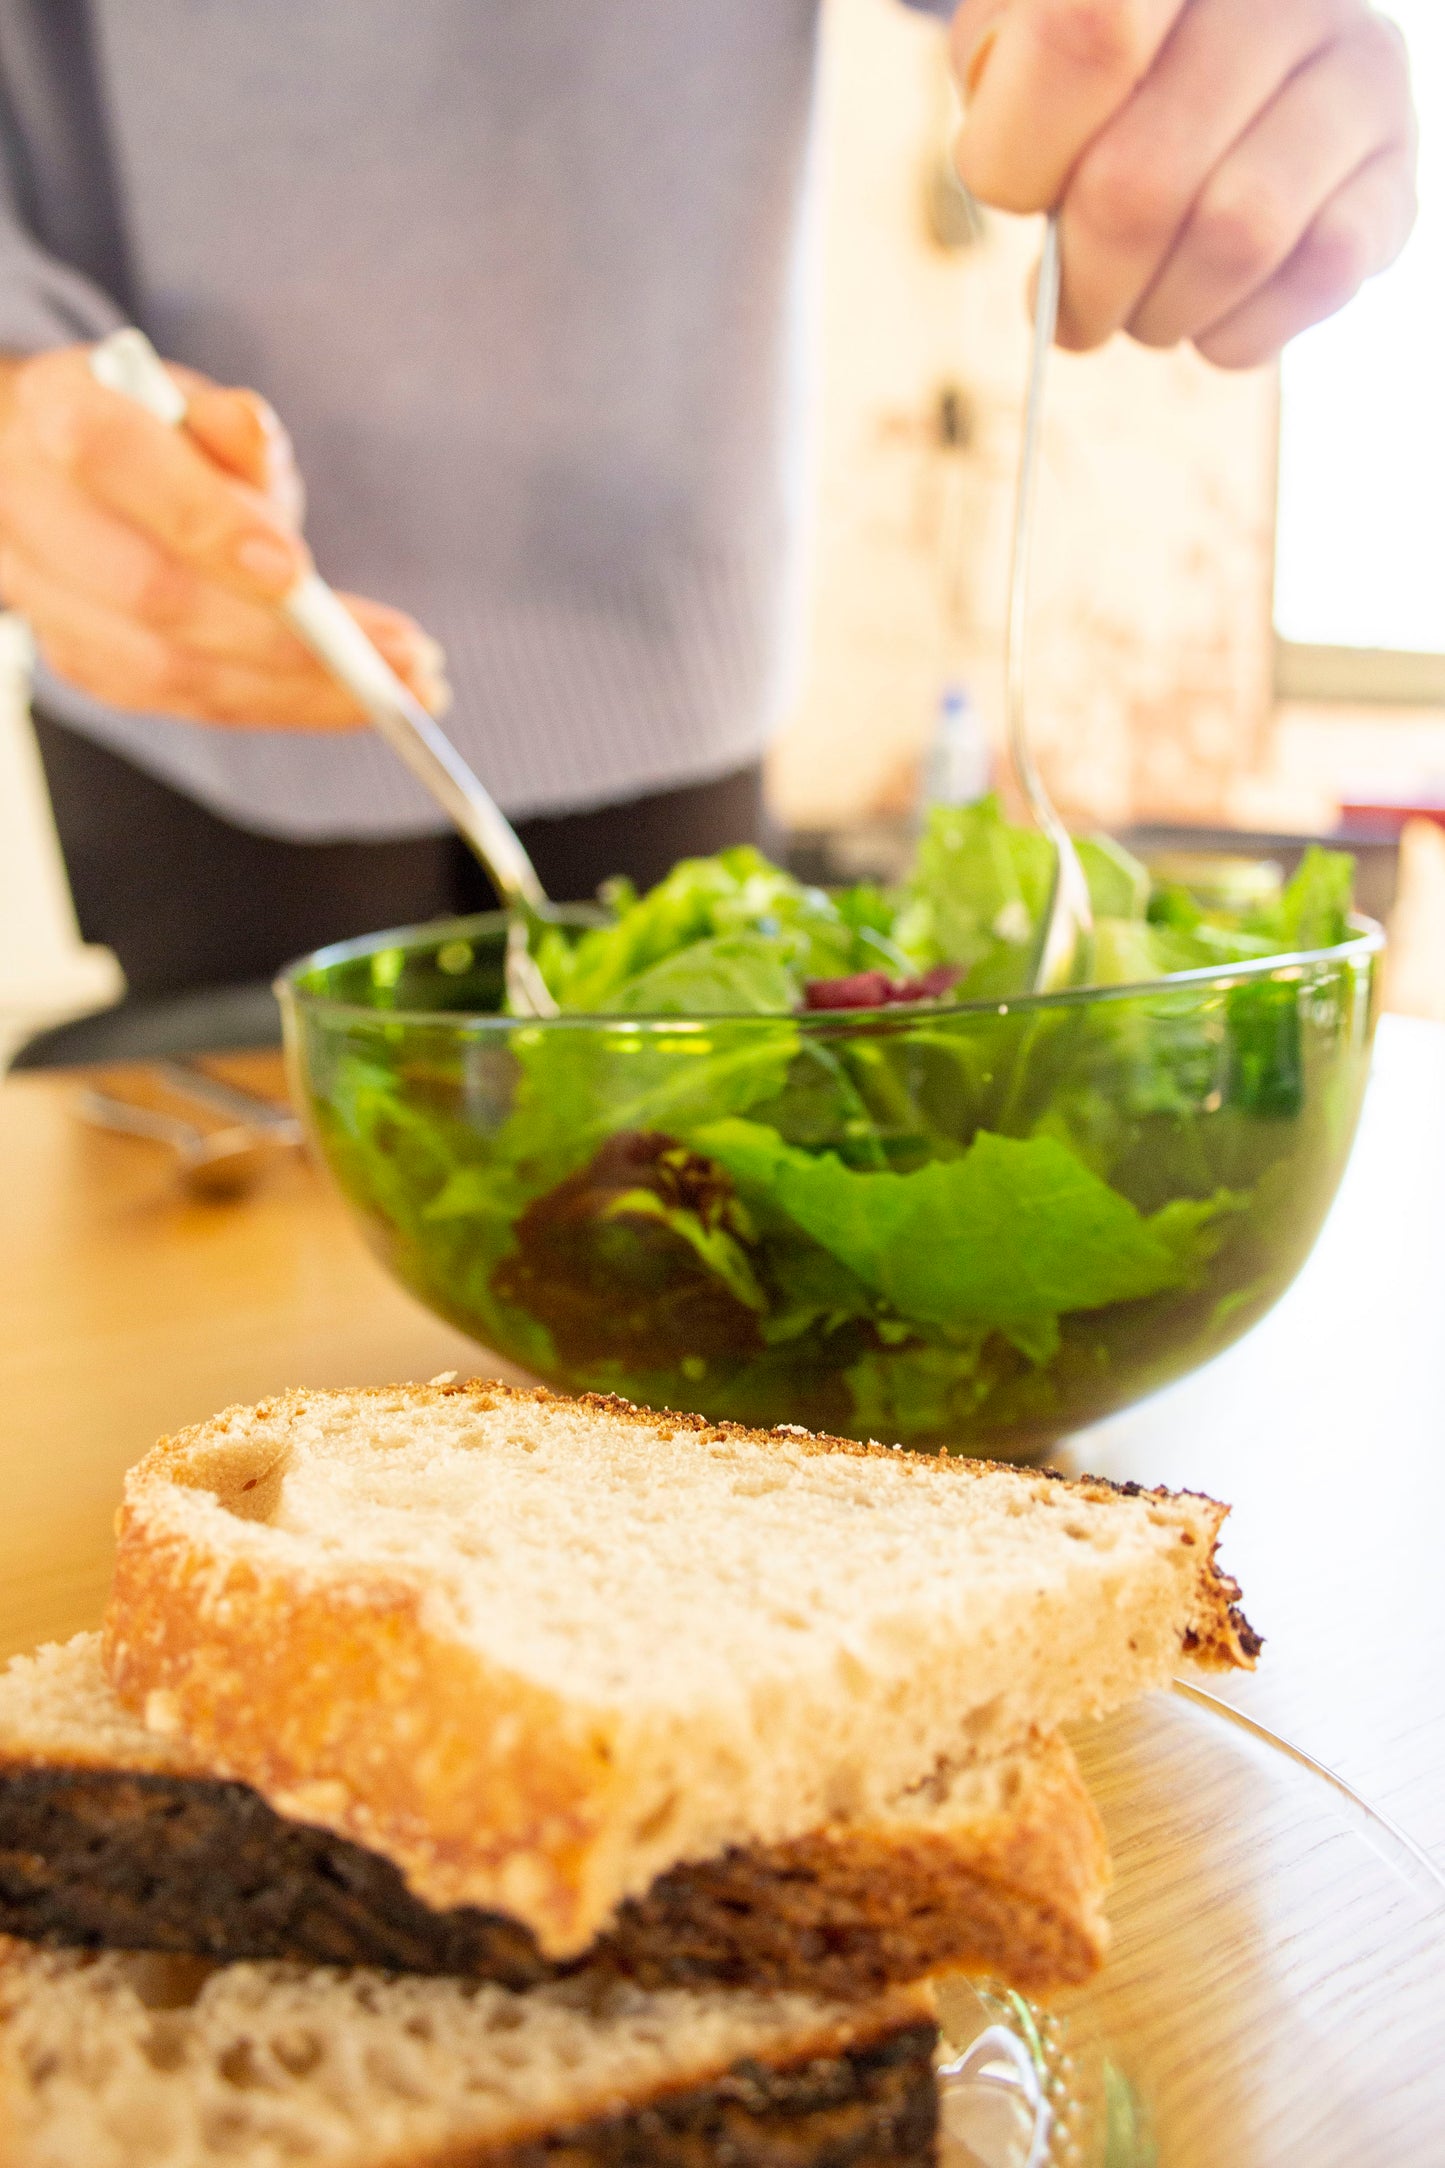 A person serving salad from a large nesting bowl made from an emerald recycled bottle